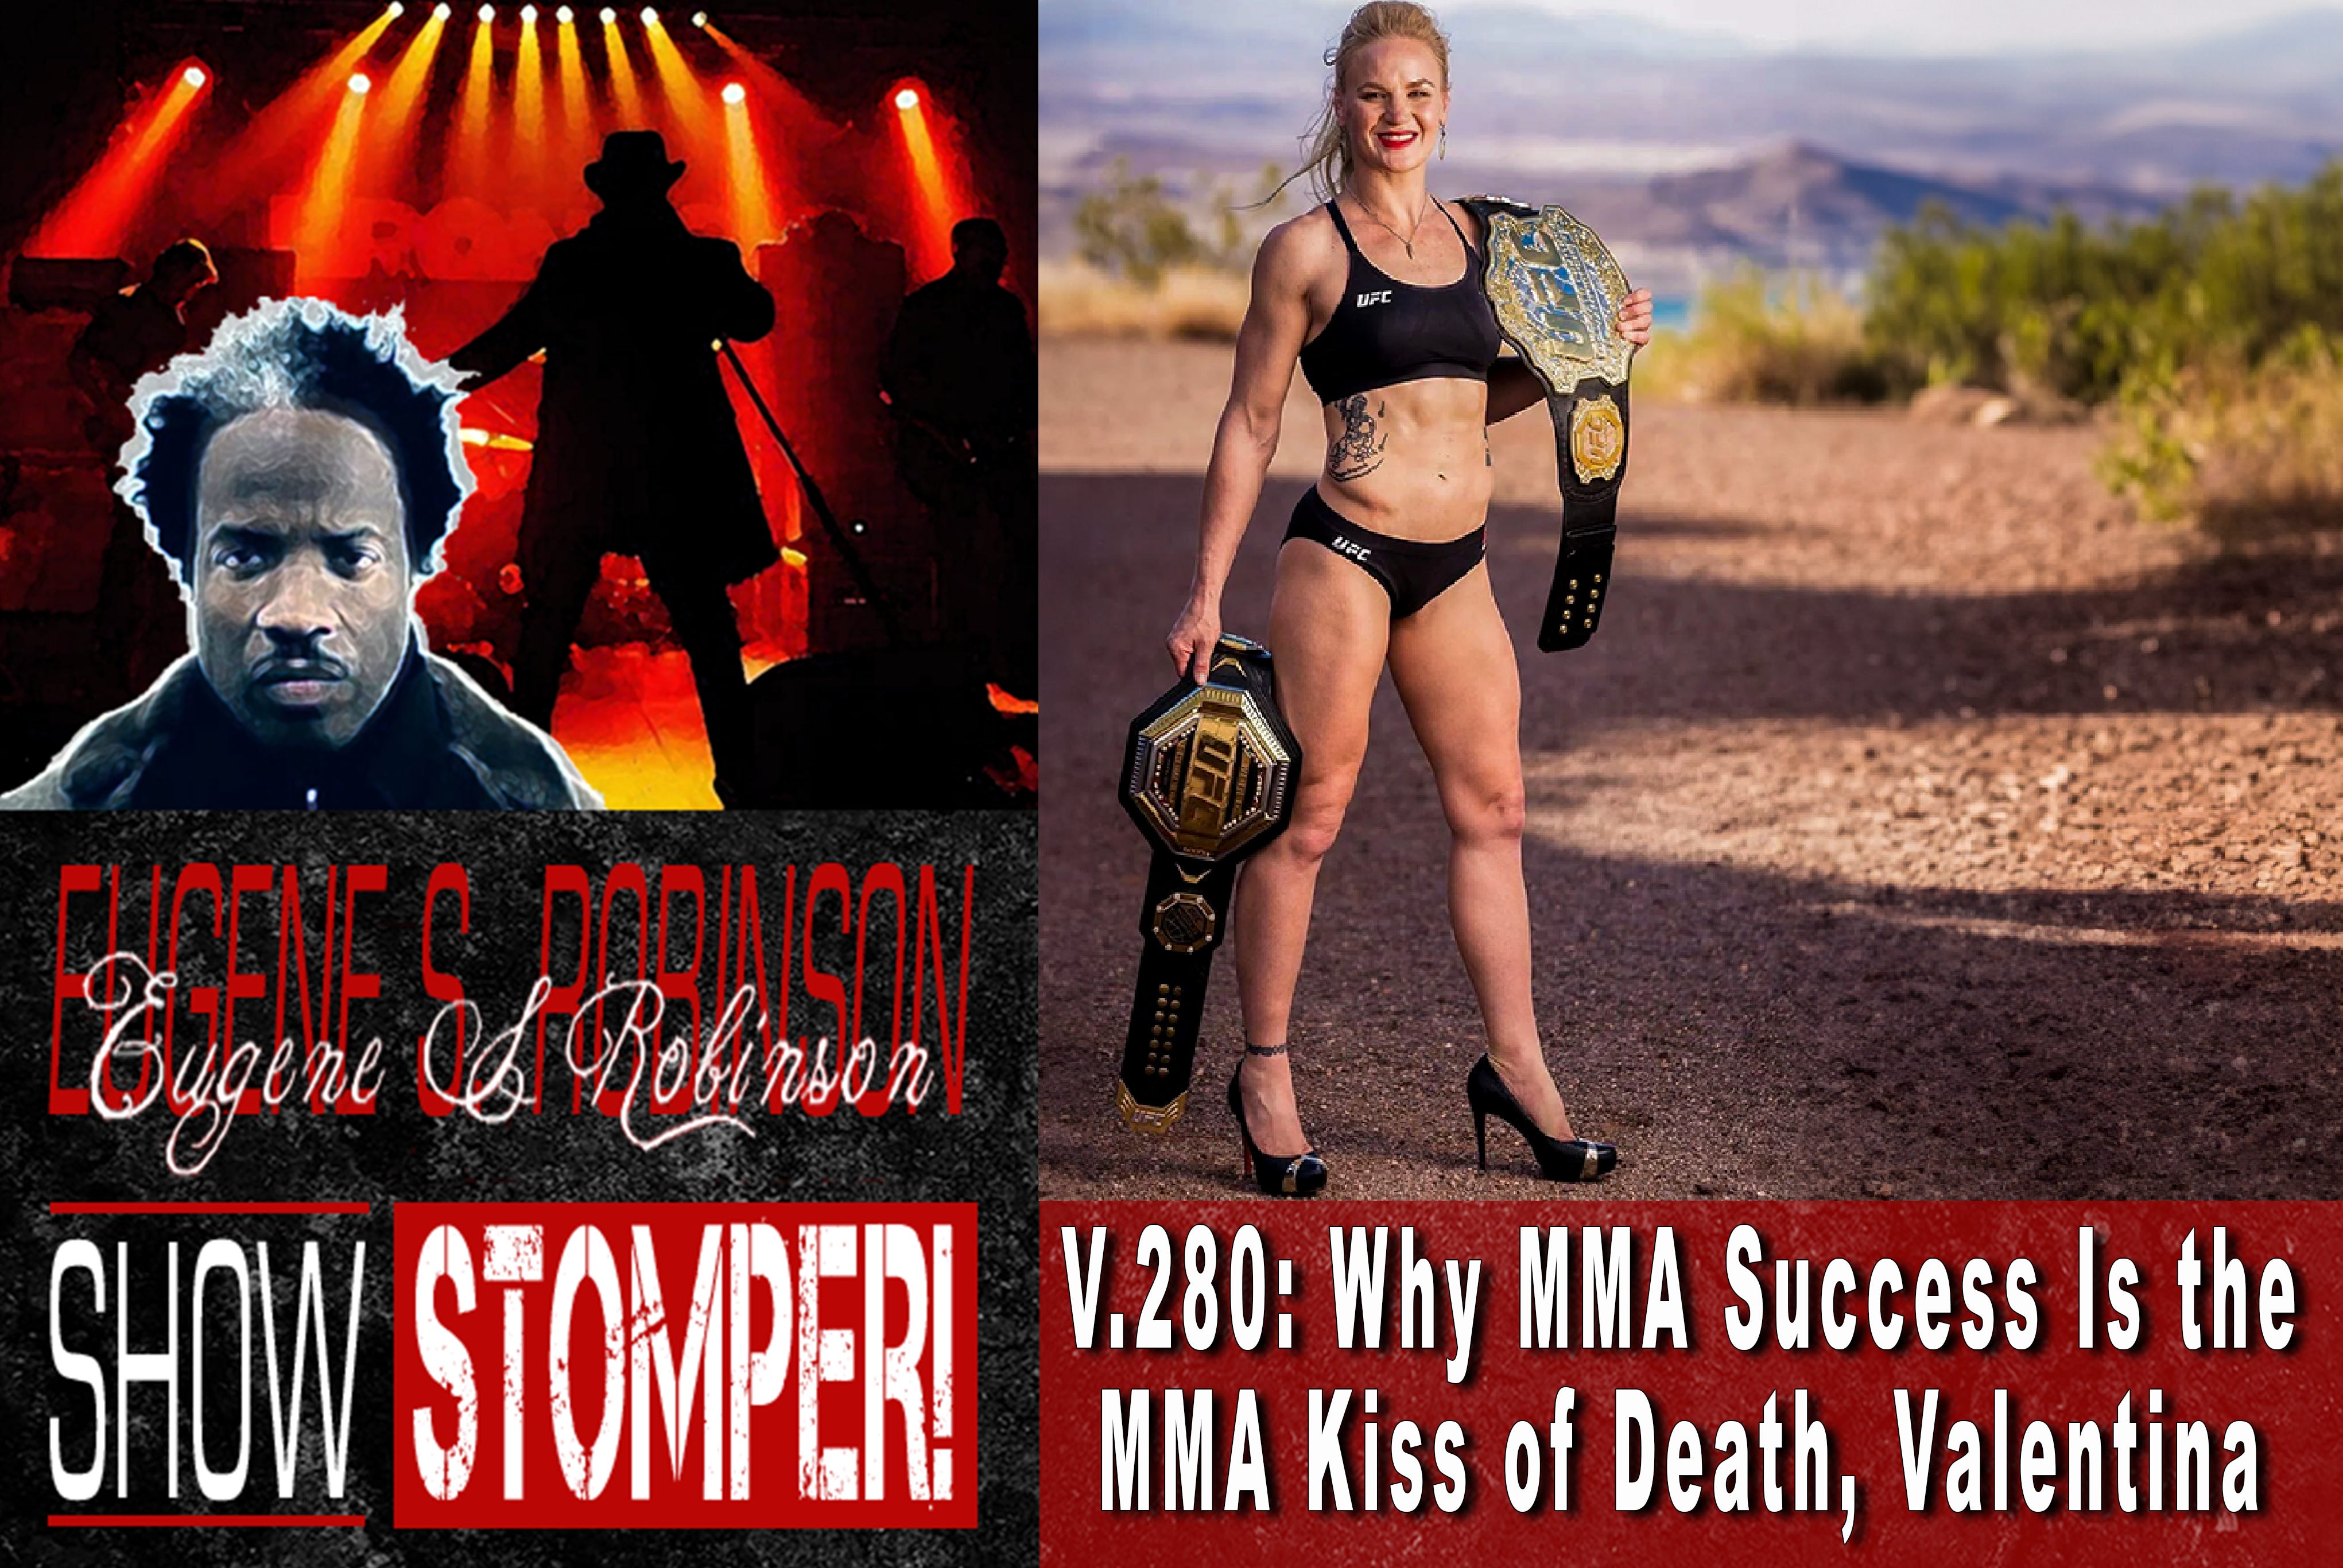 V.280: Why MMA Success Is the MMA Kiss of Death, Valentina: On The Eugene S. Robinson Show Stomper!